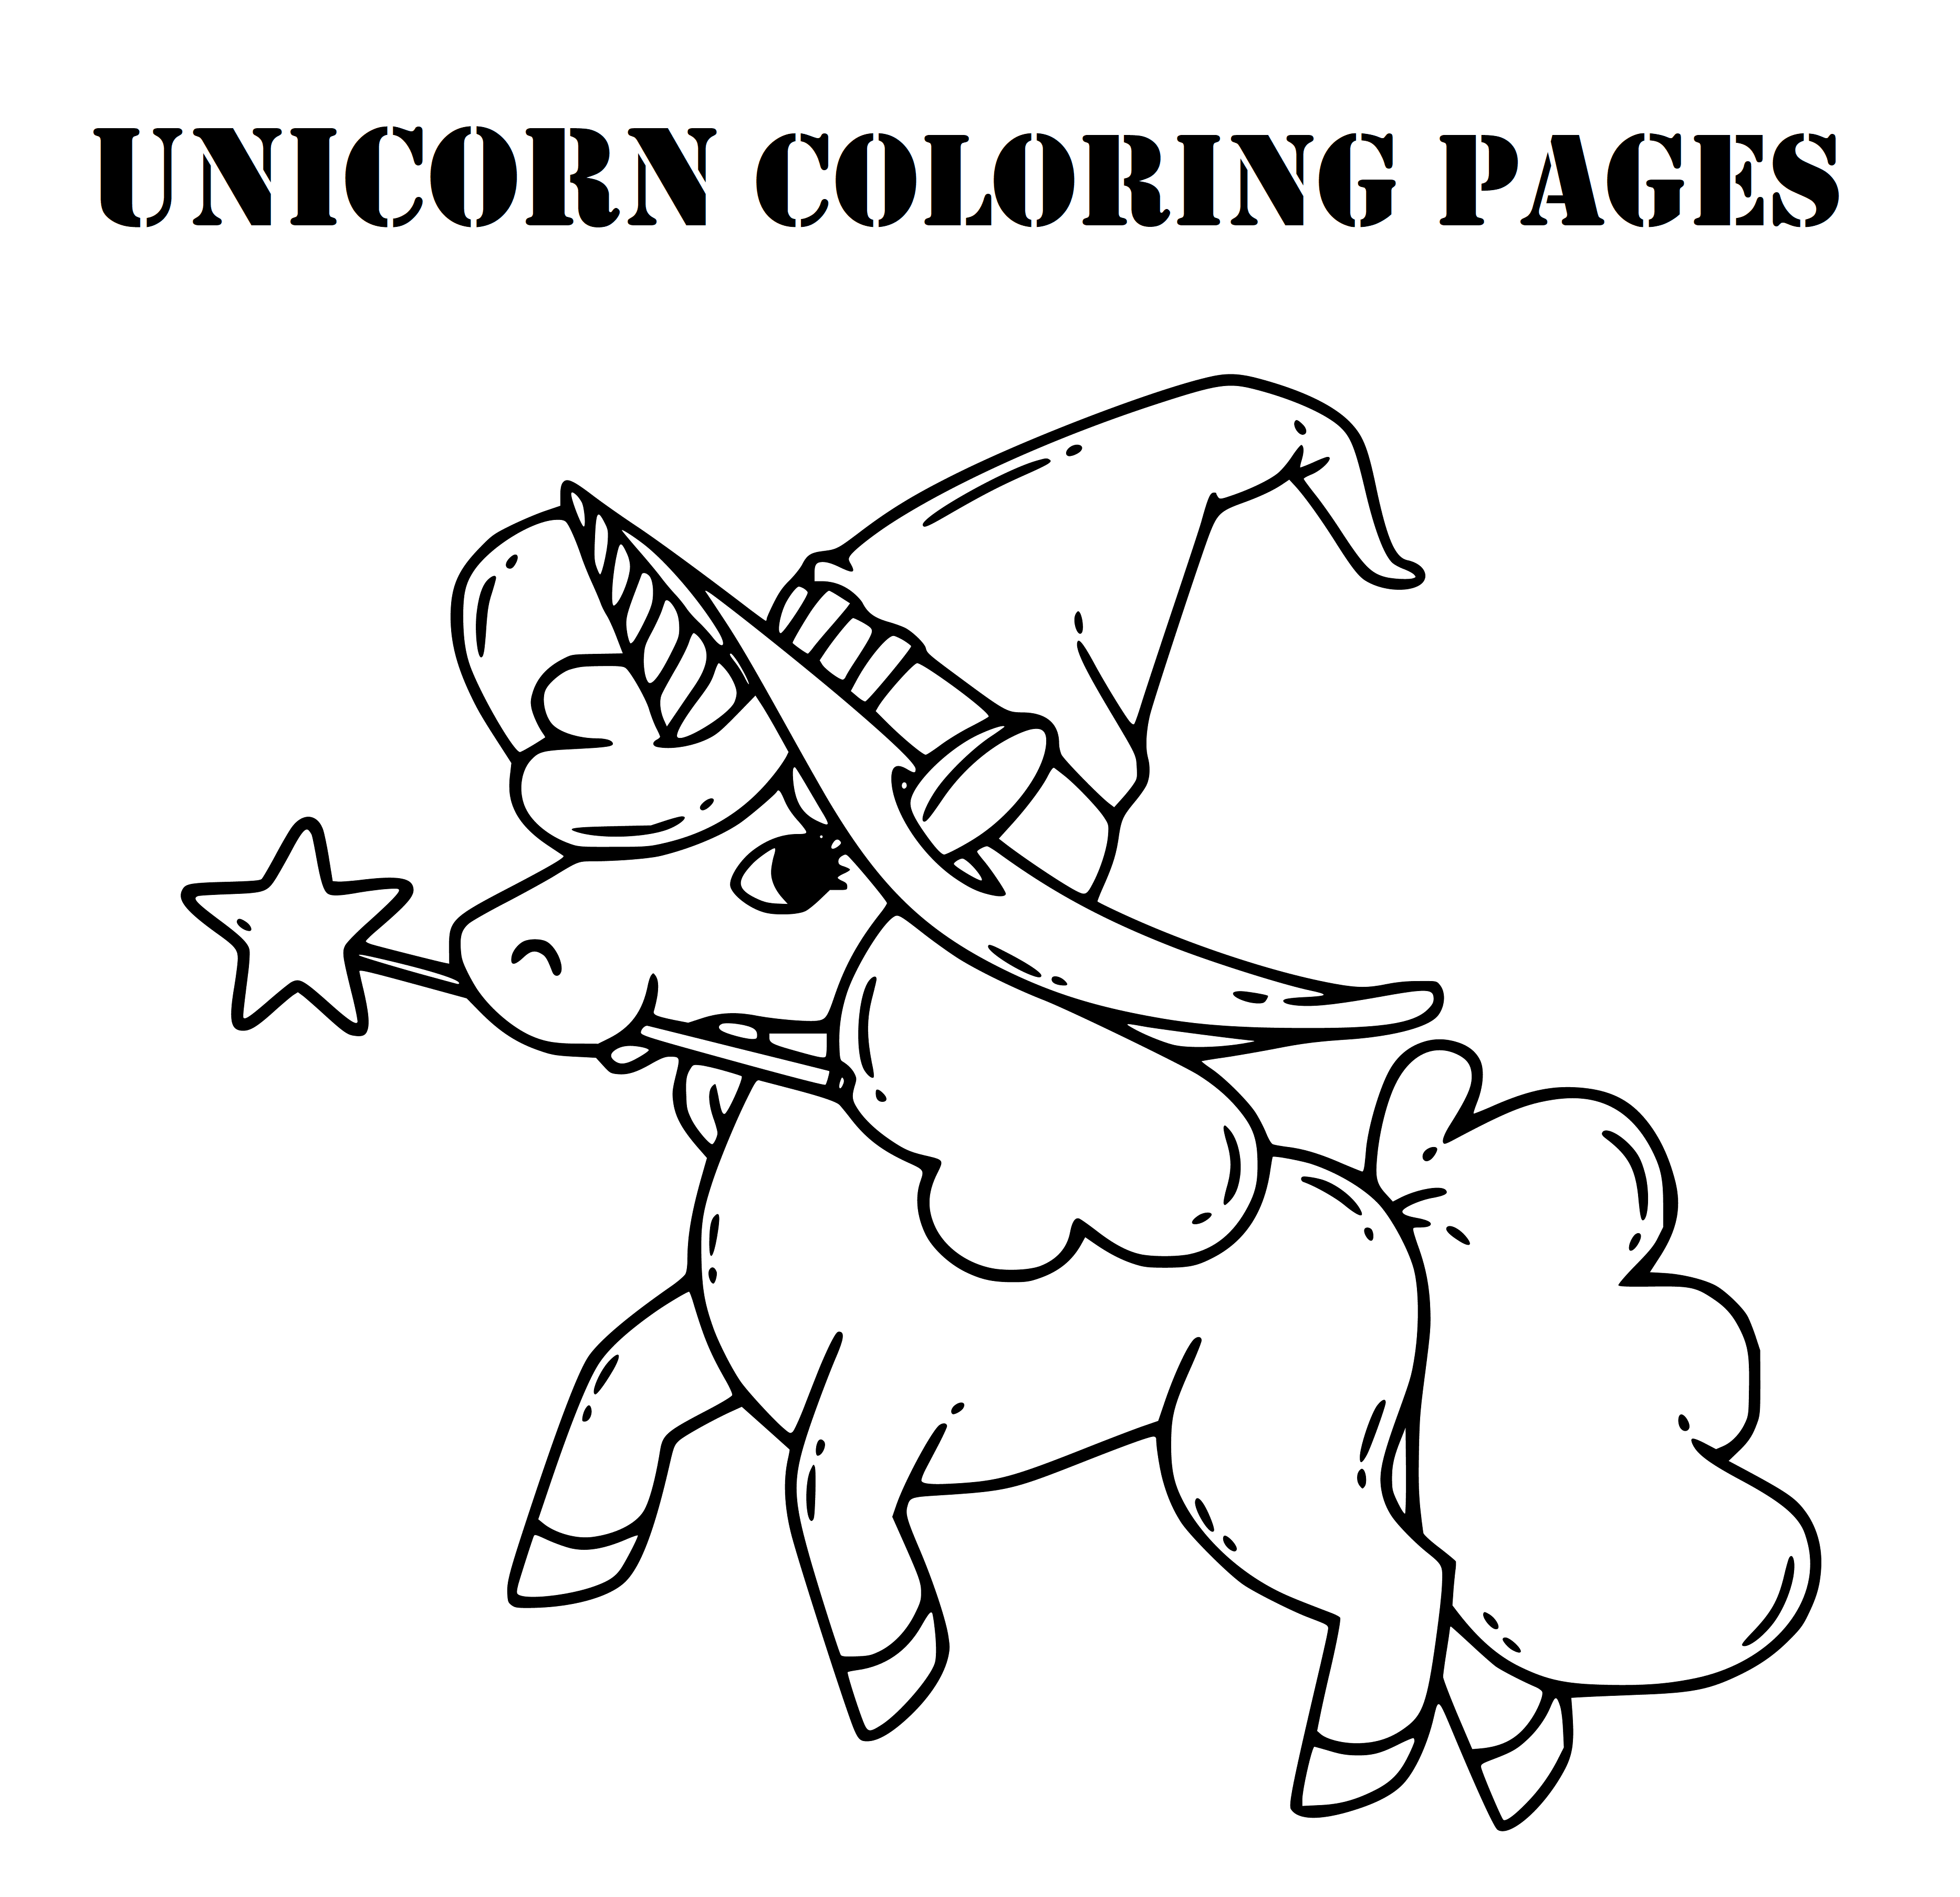 Printable The cute unicorn is wearing a Christmas hat. It is holding a magic wand in its mouth Coloring Page for kids.